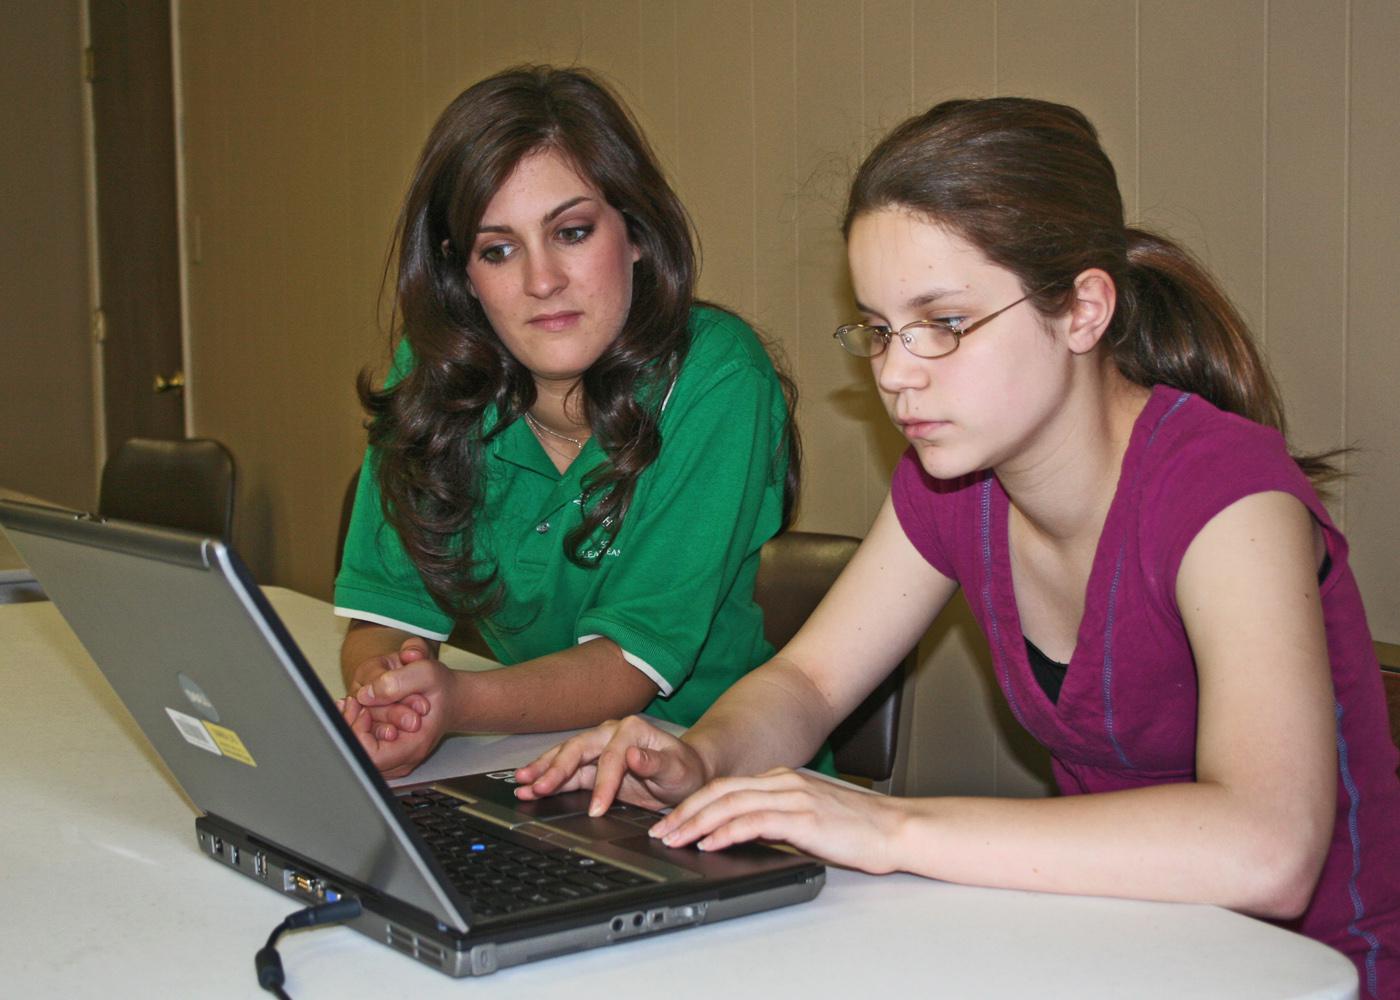 Chelsi Smith, 18, of Guntown, and Ashley Gray, 16, of Tupelo, complete a presentation for the upcoming state 4-H Club Congress at Mississippi State University May 27-29. Smith, a Saltillo High School graduating senior, will complete her year as president of the state 4-H Council during the event. (Photo by Patti Drapala)